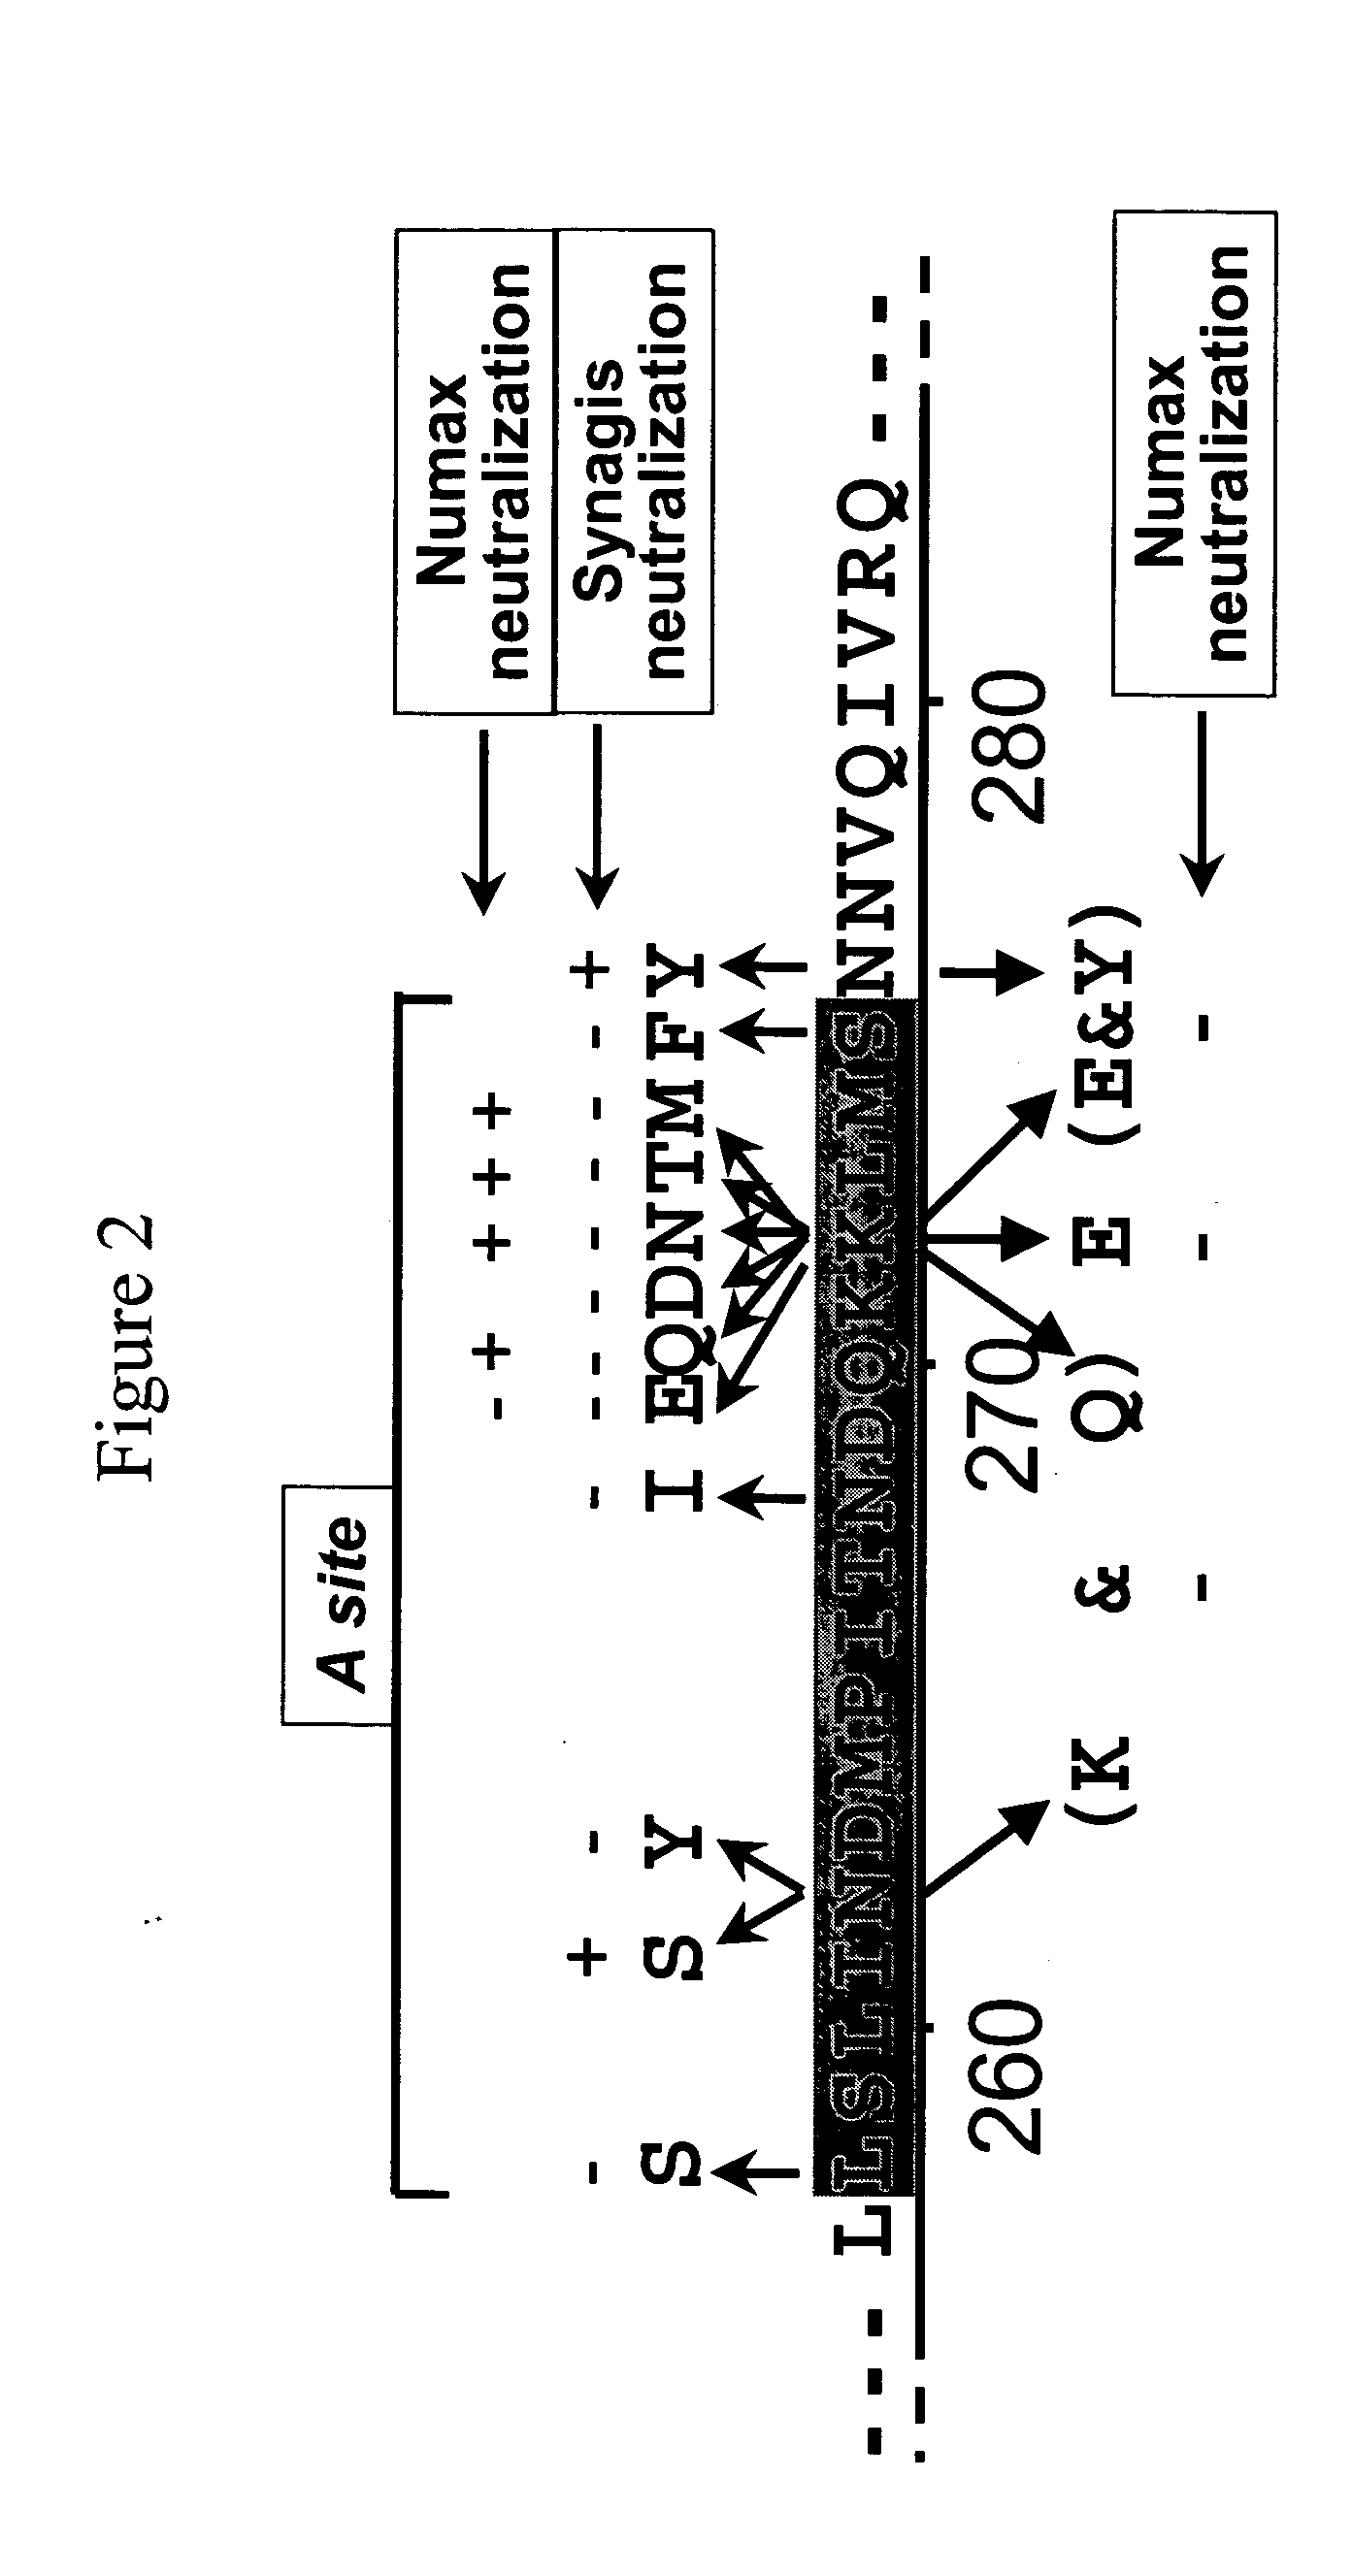 Antibodies against and methods for producing vaccines for respiratory syncytial virus